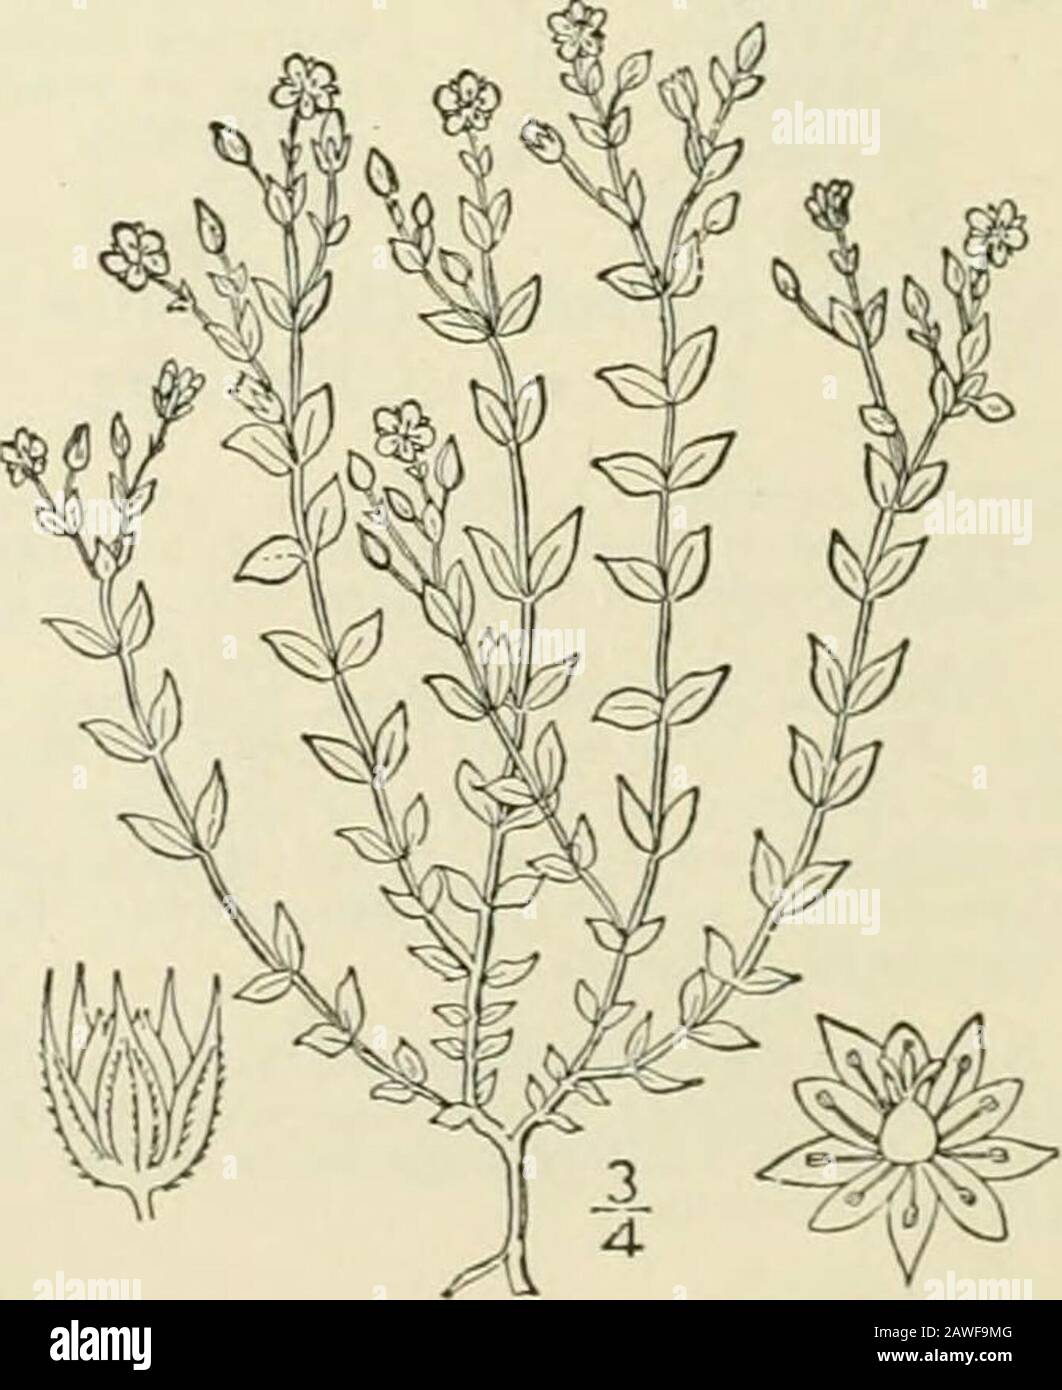 An illustrated flora of the northern United States, Canada and the British possessions : from Newfoundland to the parallel of the southern boundary of Virginia and from the Atlantic Ocean westward to the 102nd meridian; 2nd ed. . not ribbed ; alpine and northern. I. Arenaria serpyllifolia L. Thyme-leaved.Sandwort. Fig. 1777. Arenaria serpyllifolia L. Sp. PI. 423. 1753. .Vnnual, slender, slightly downy-pubescent,widely branched and diffuse, 2-8 high. Leavesovate, 2-4 long, iJ-2 wide, acute; pedi-cels slender, 2-6 long; bracts ovate, resem-bling the leaves; flowers 2 broad or less, verynumerous Stock Photo